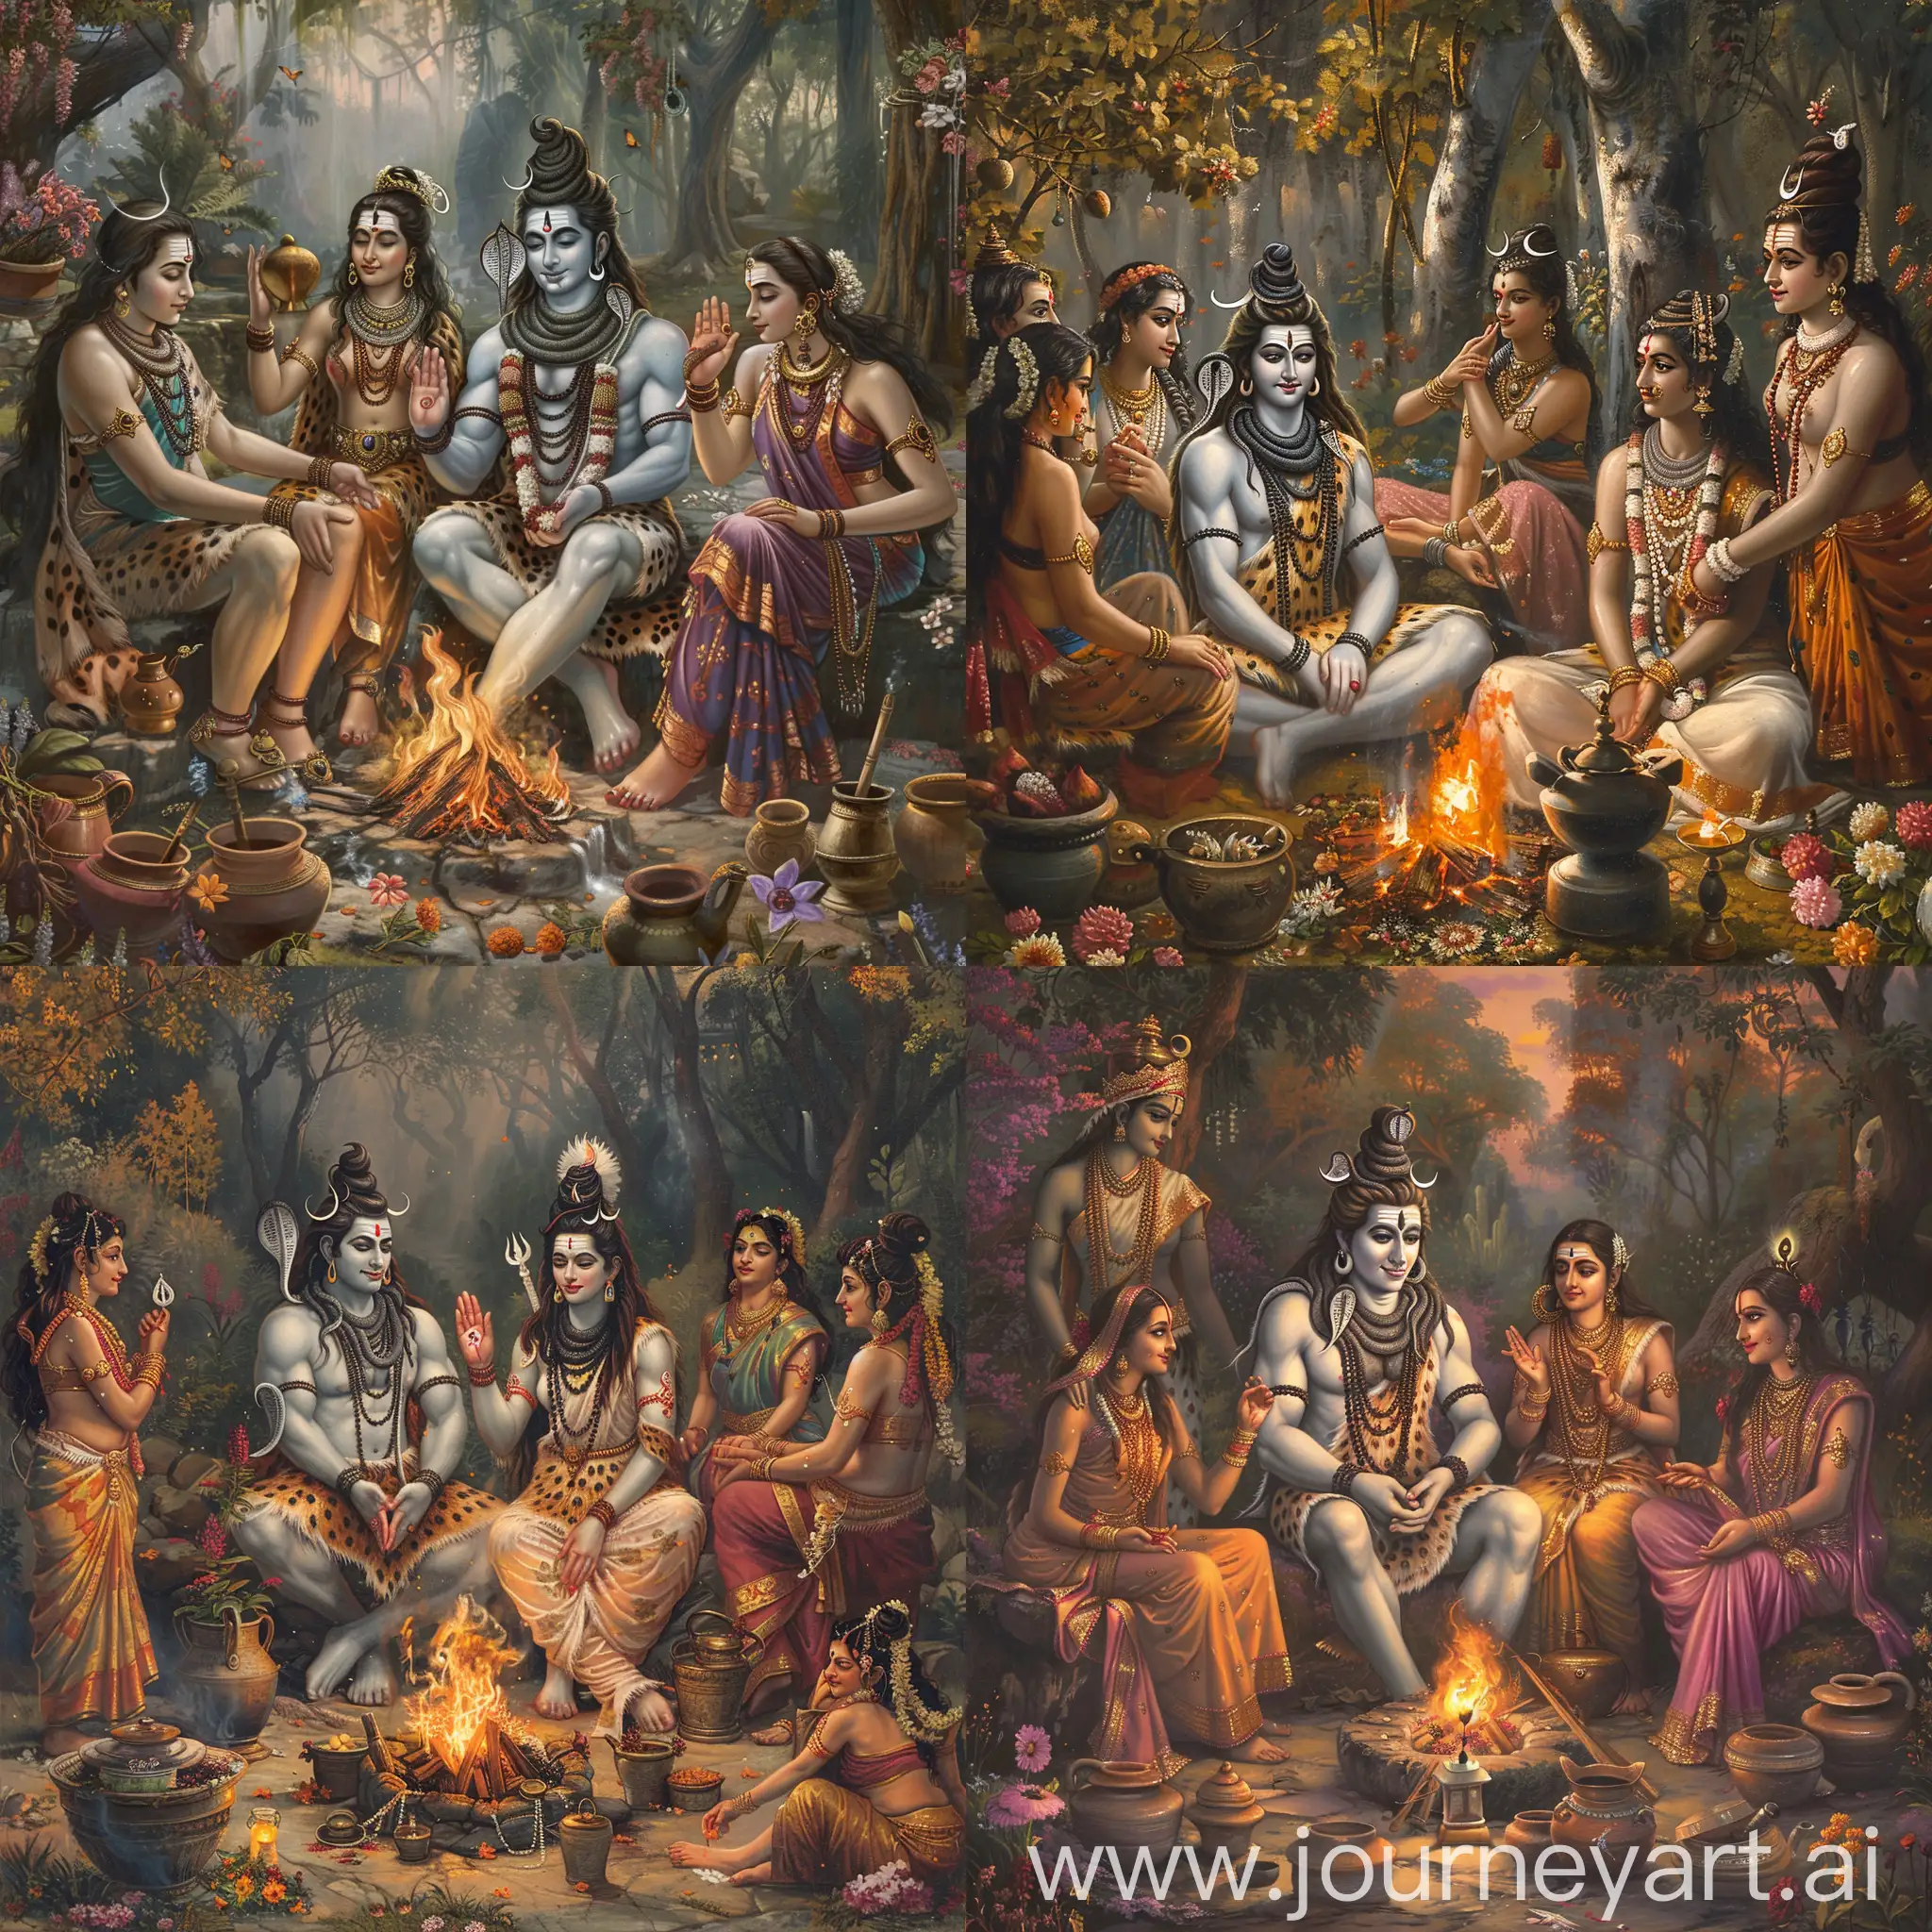 Divine-Gathering-Lord-Shiva-and-Parvati-Surrounded-by-Devotees-and-Nature